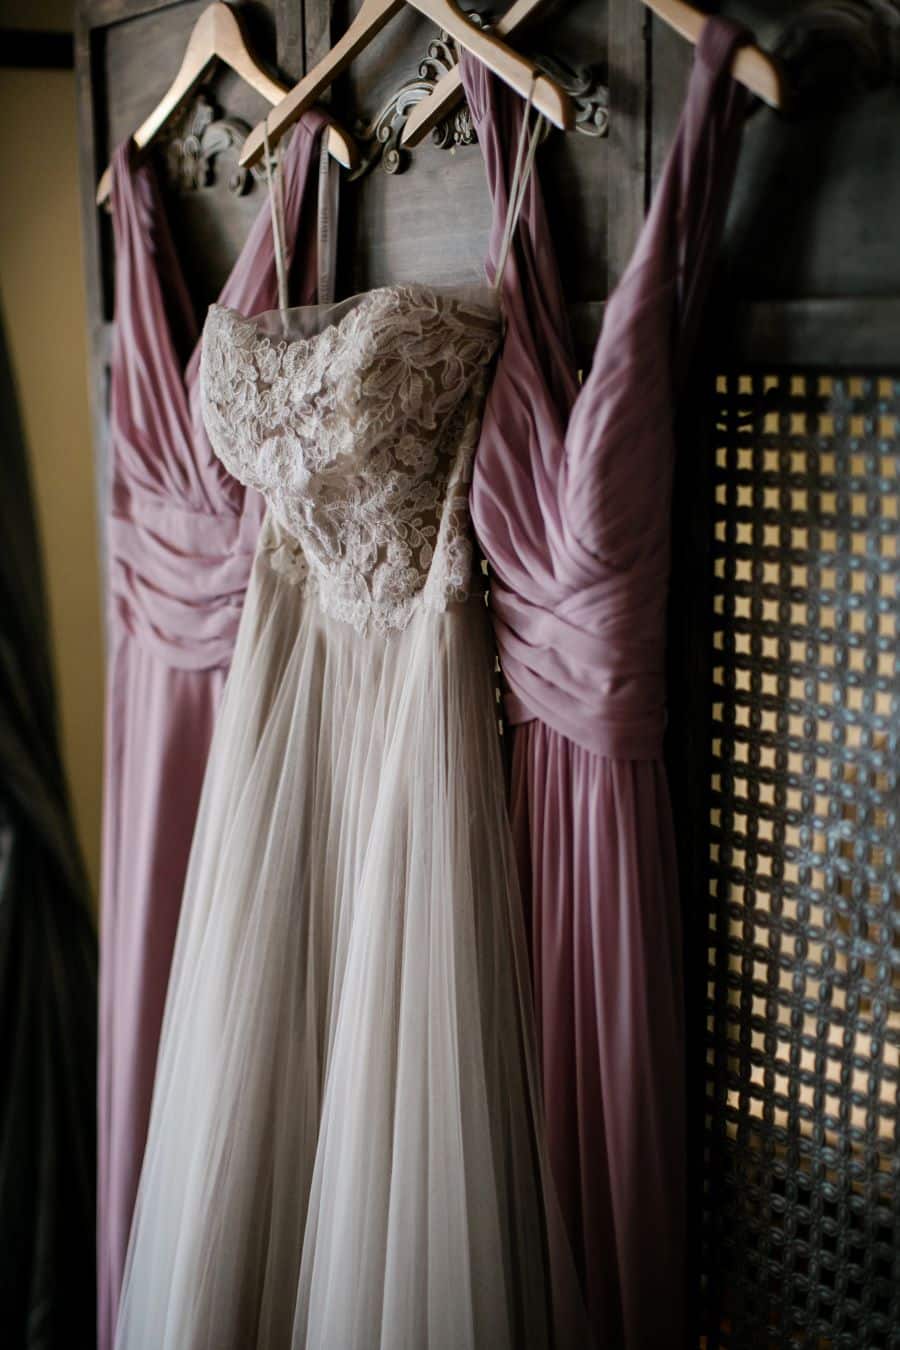 Bride's lace dress hanging with bridesmaids dusty rose dresses / Elopement / Spring / March / Dusty Rose